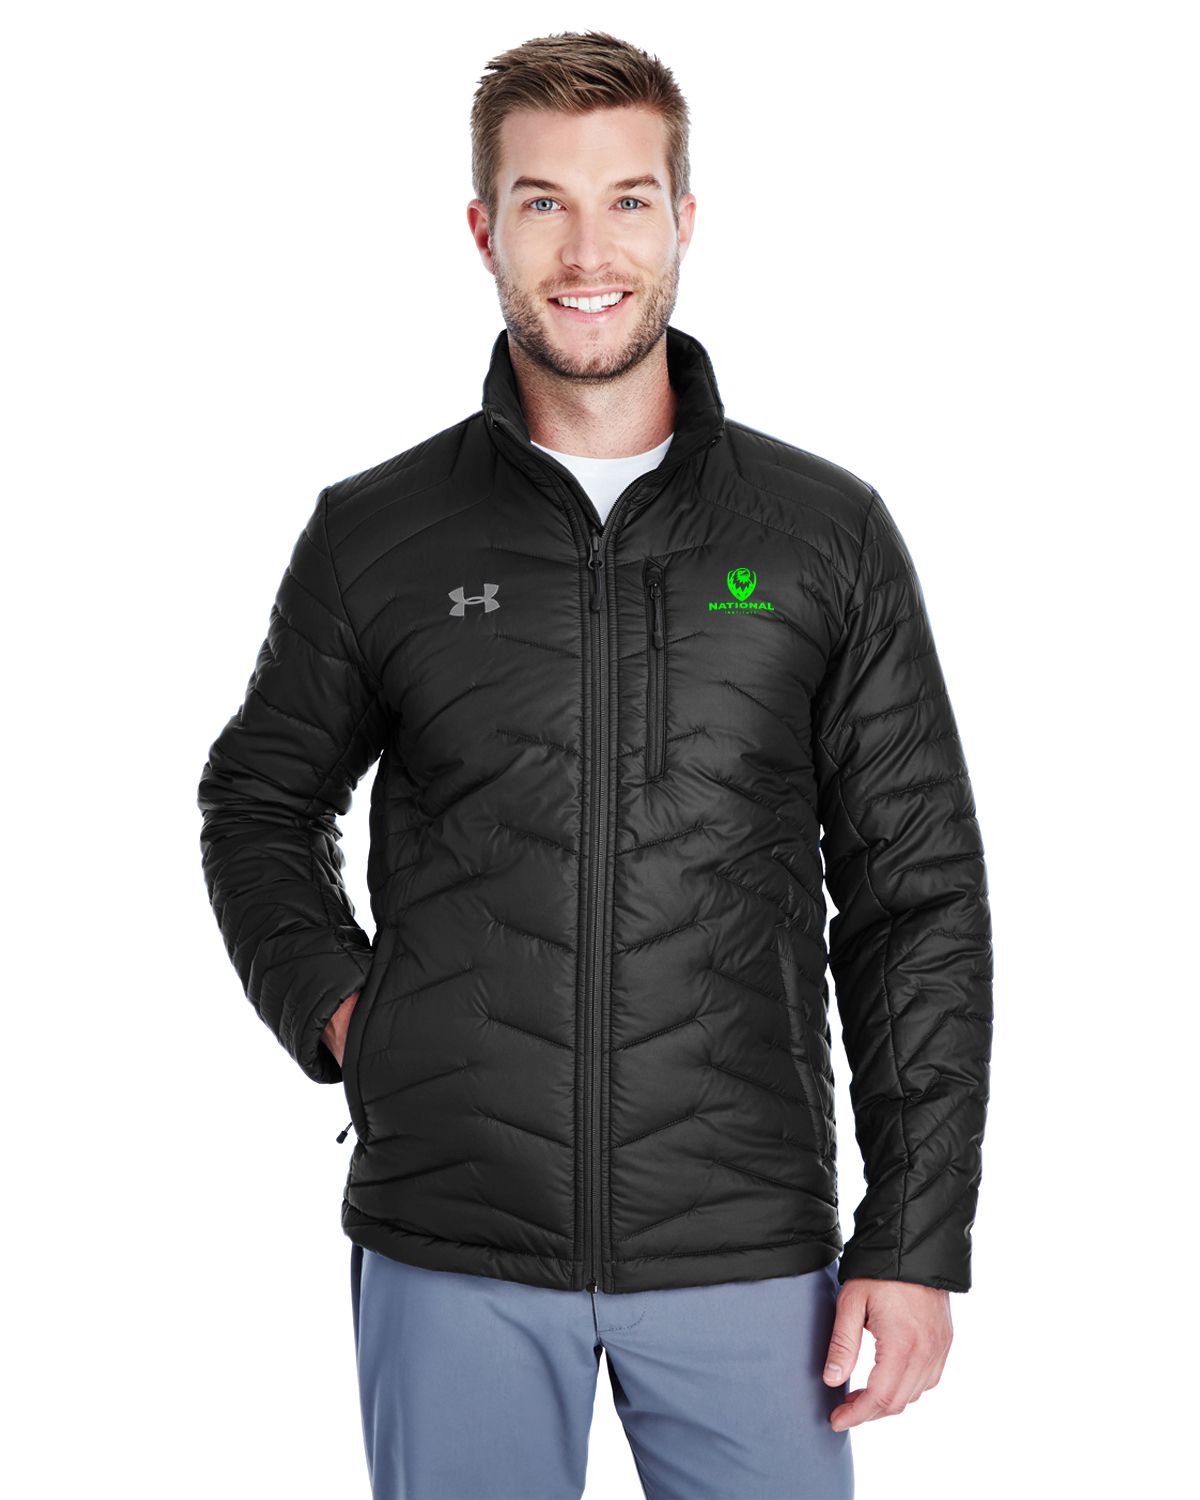 under armour coaches pullover